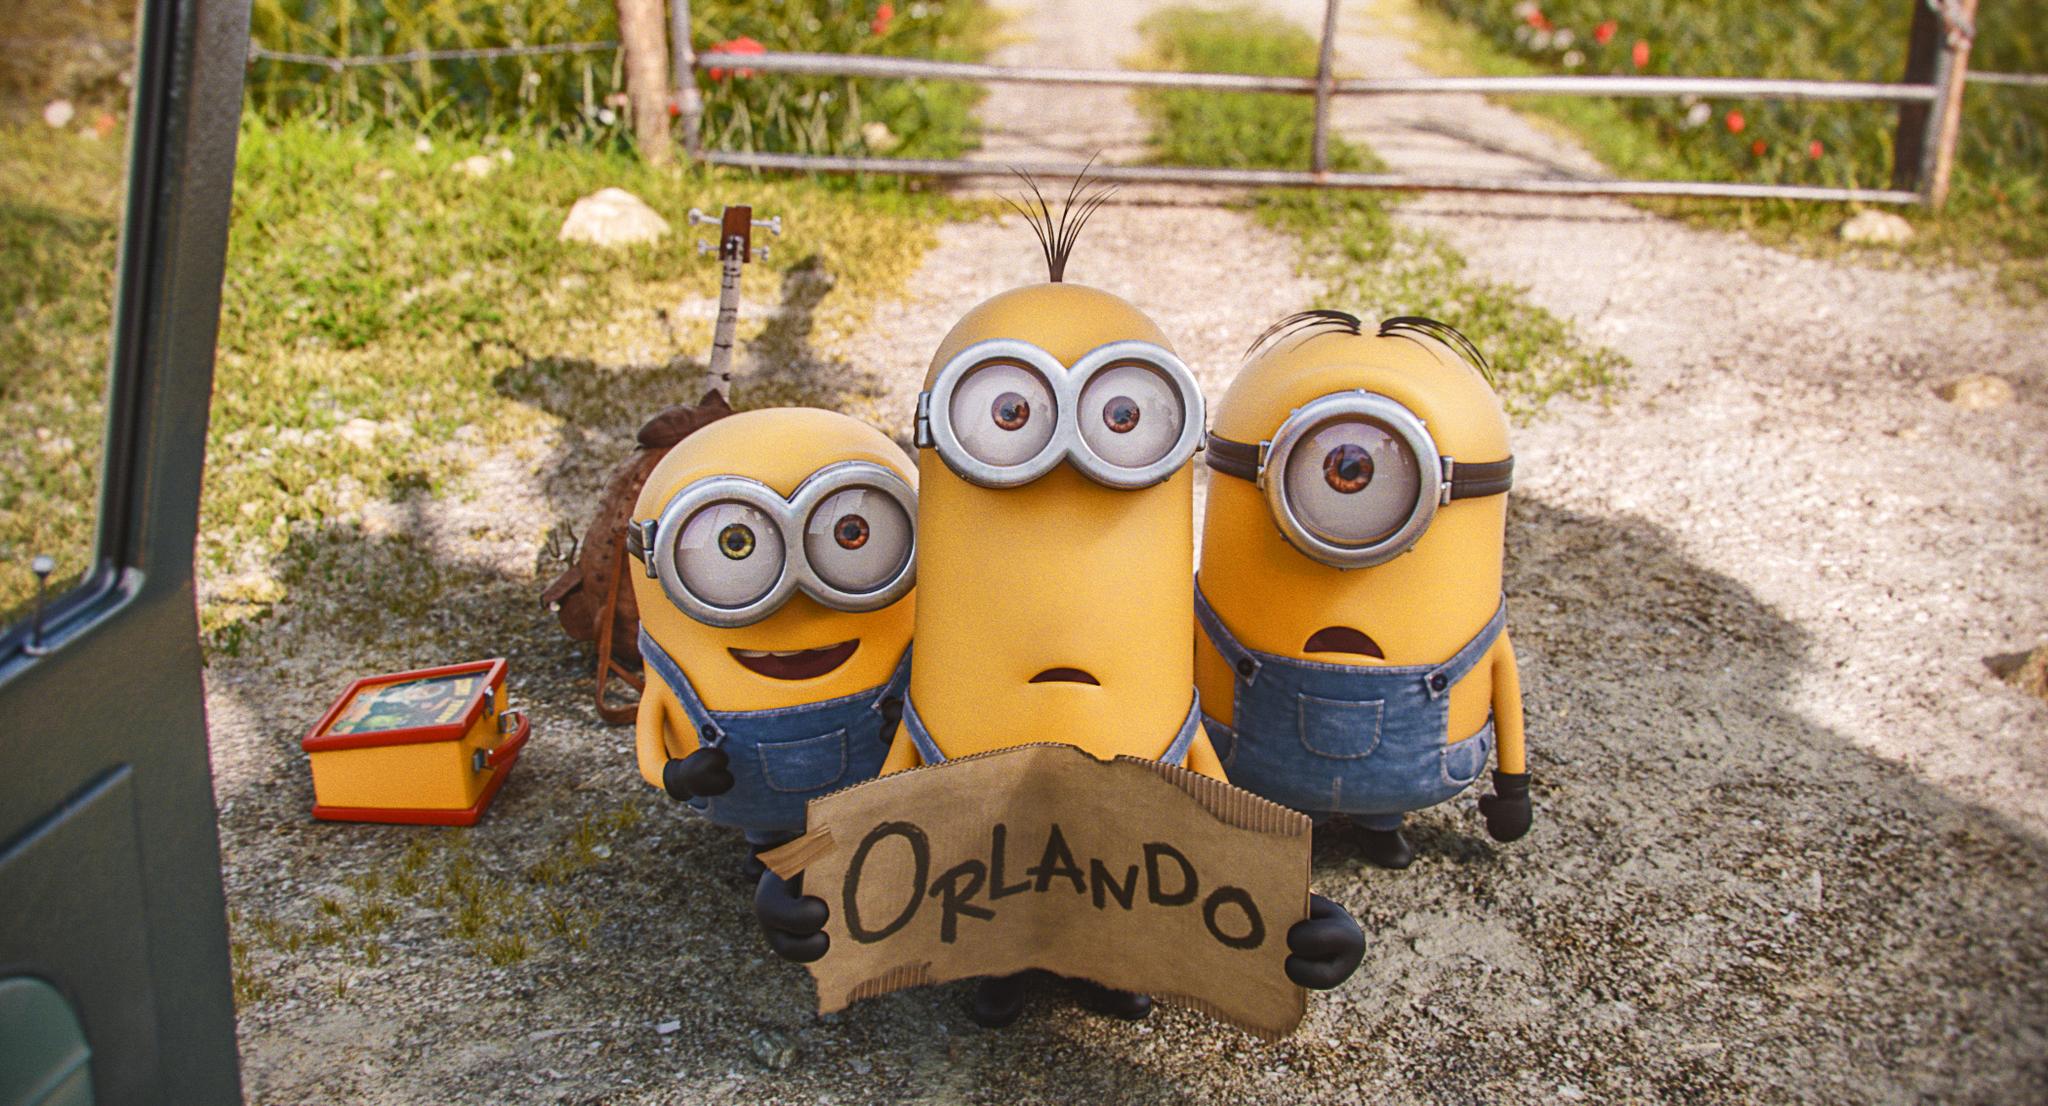 Minions holding an Orlando sign in 2015's Minions, an origin story for the Despicable Me characters.